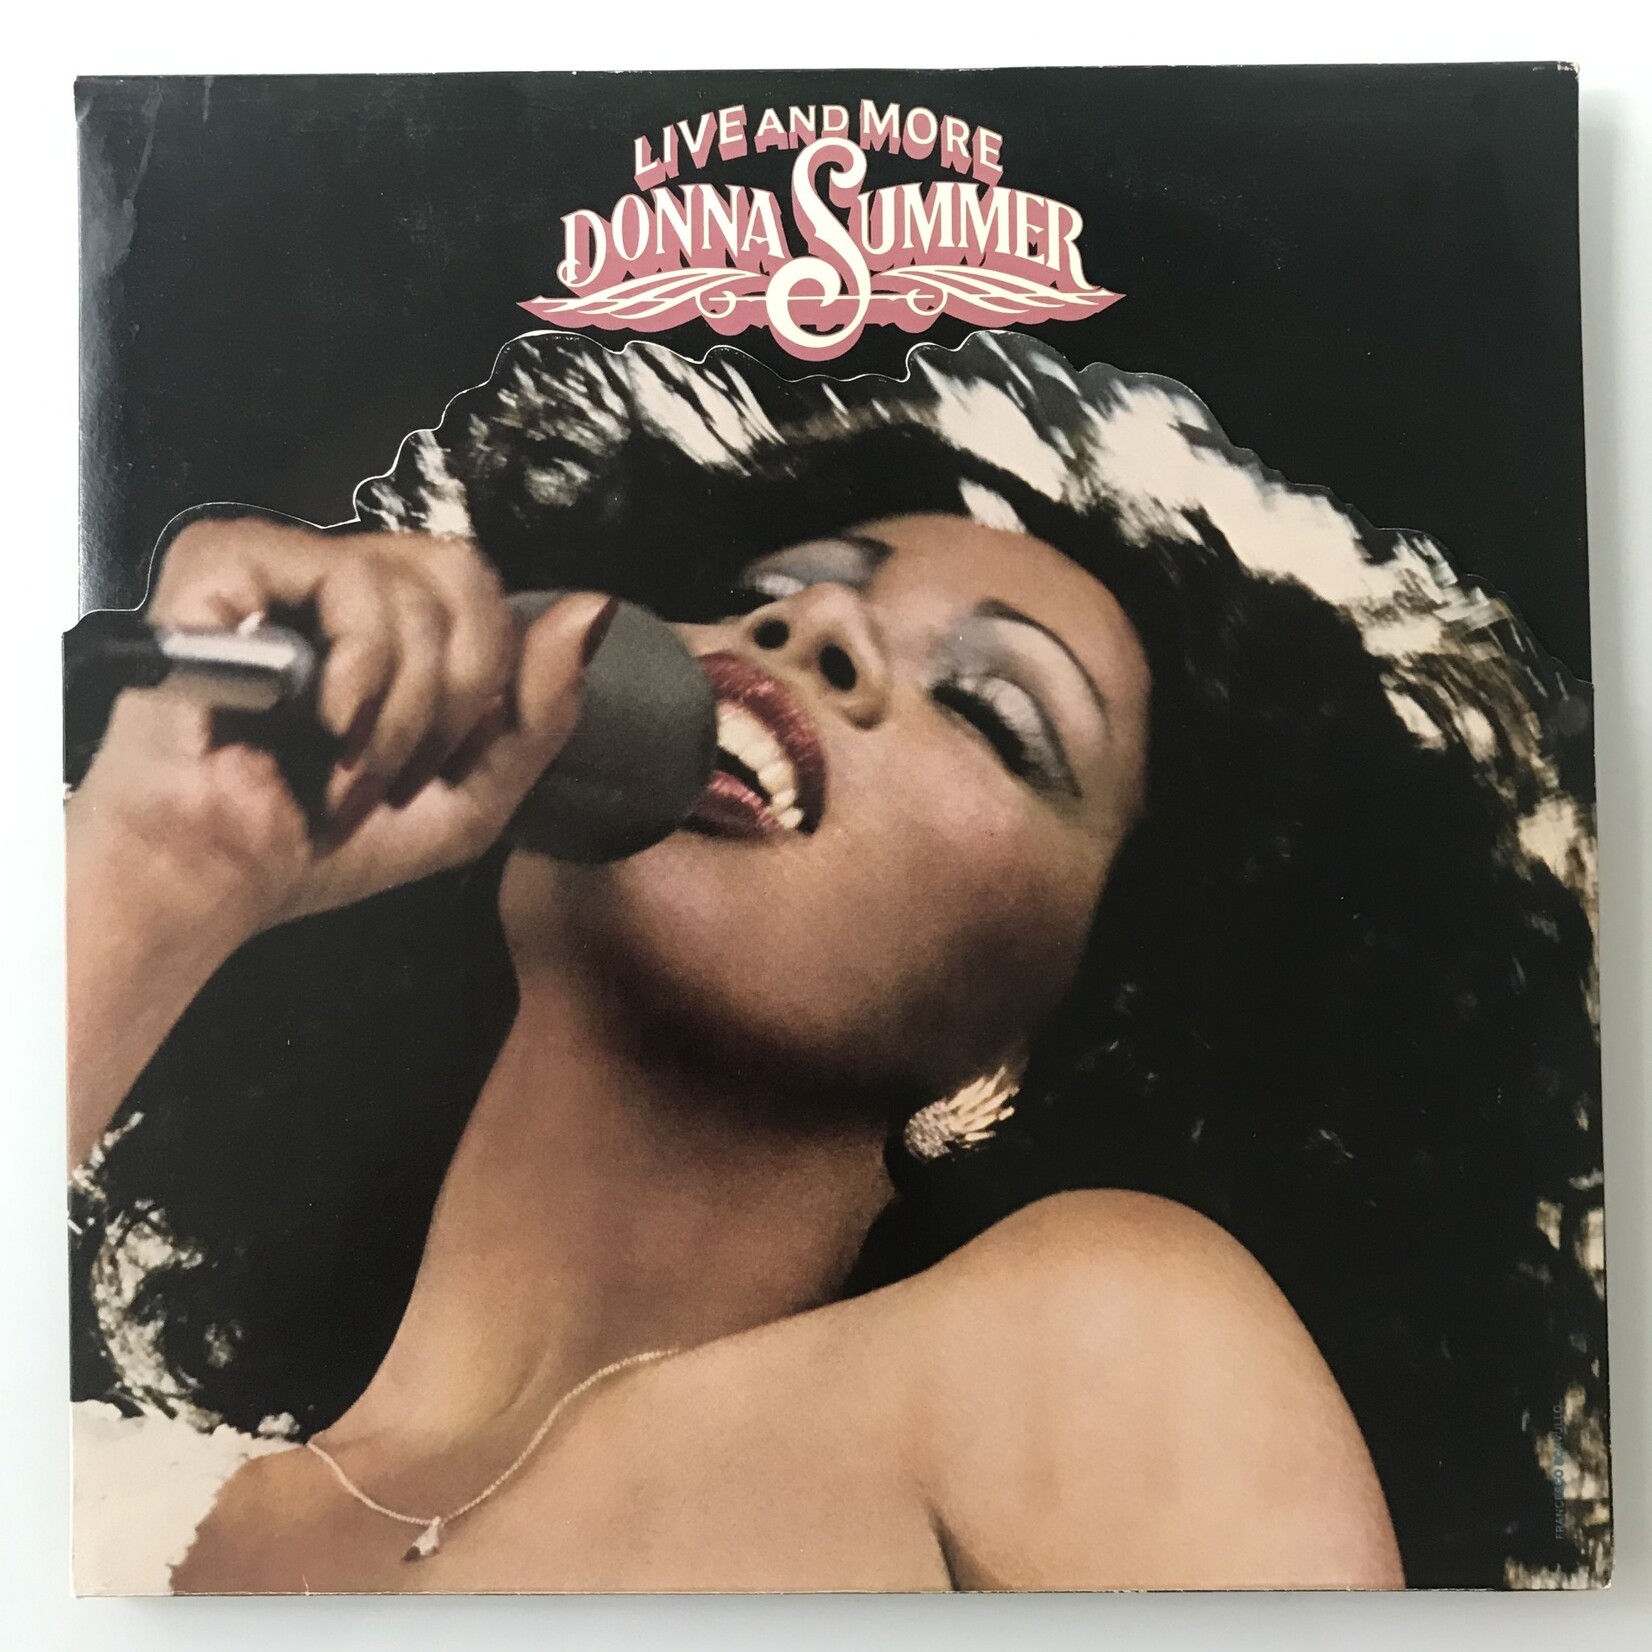 Donna Summer - Live And More - Vinyl LP (USED) - MOJOMALA LLC